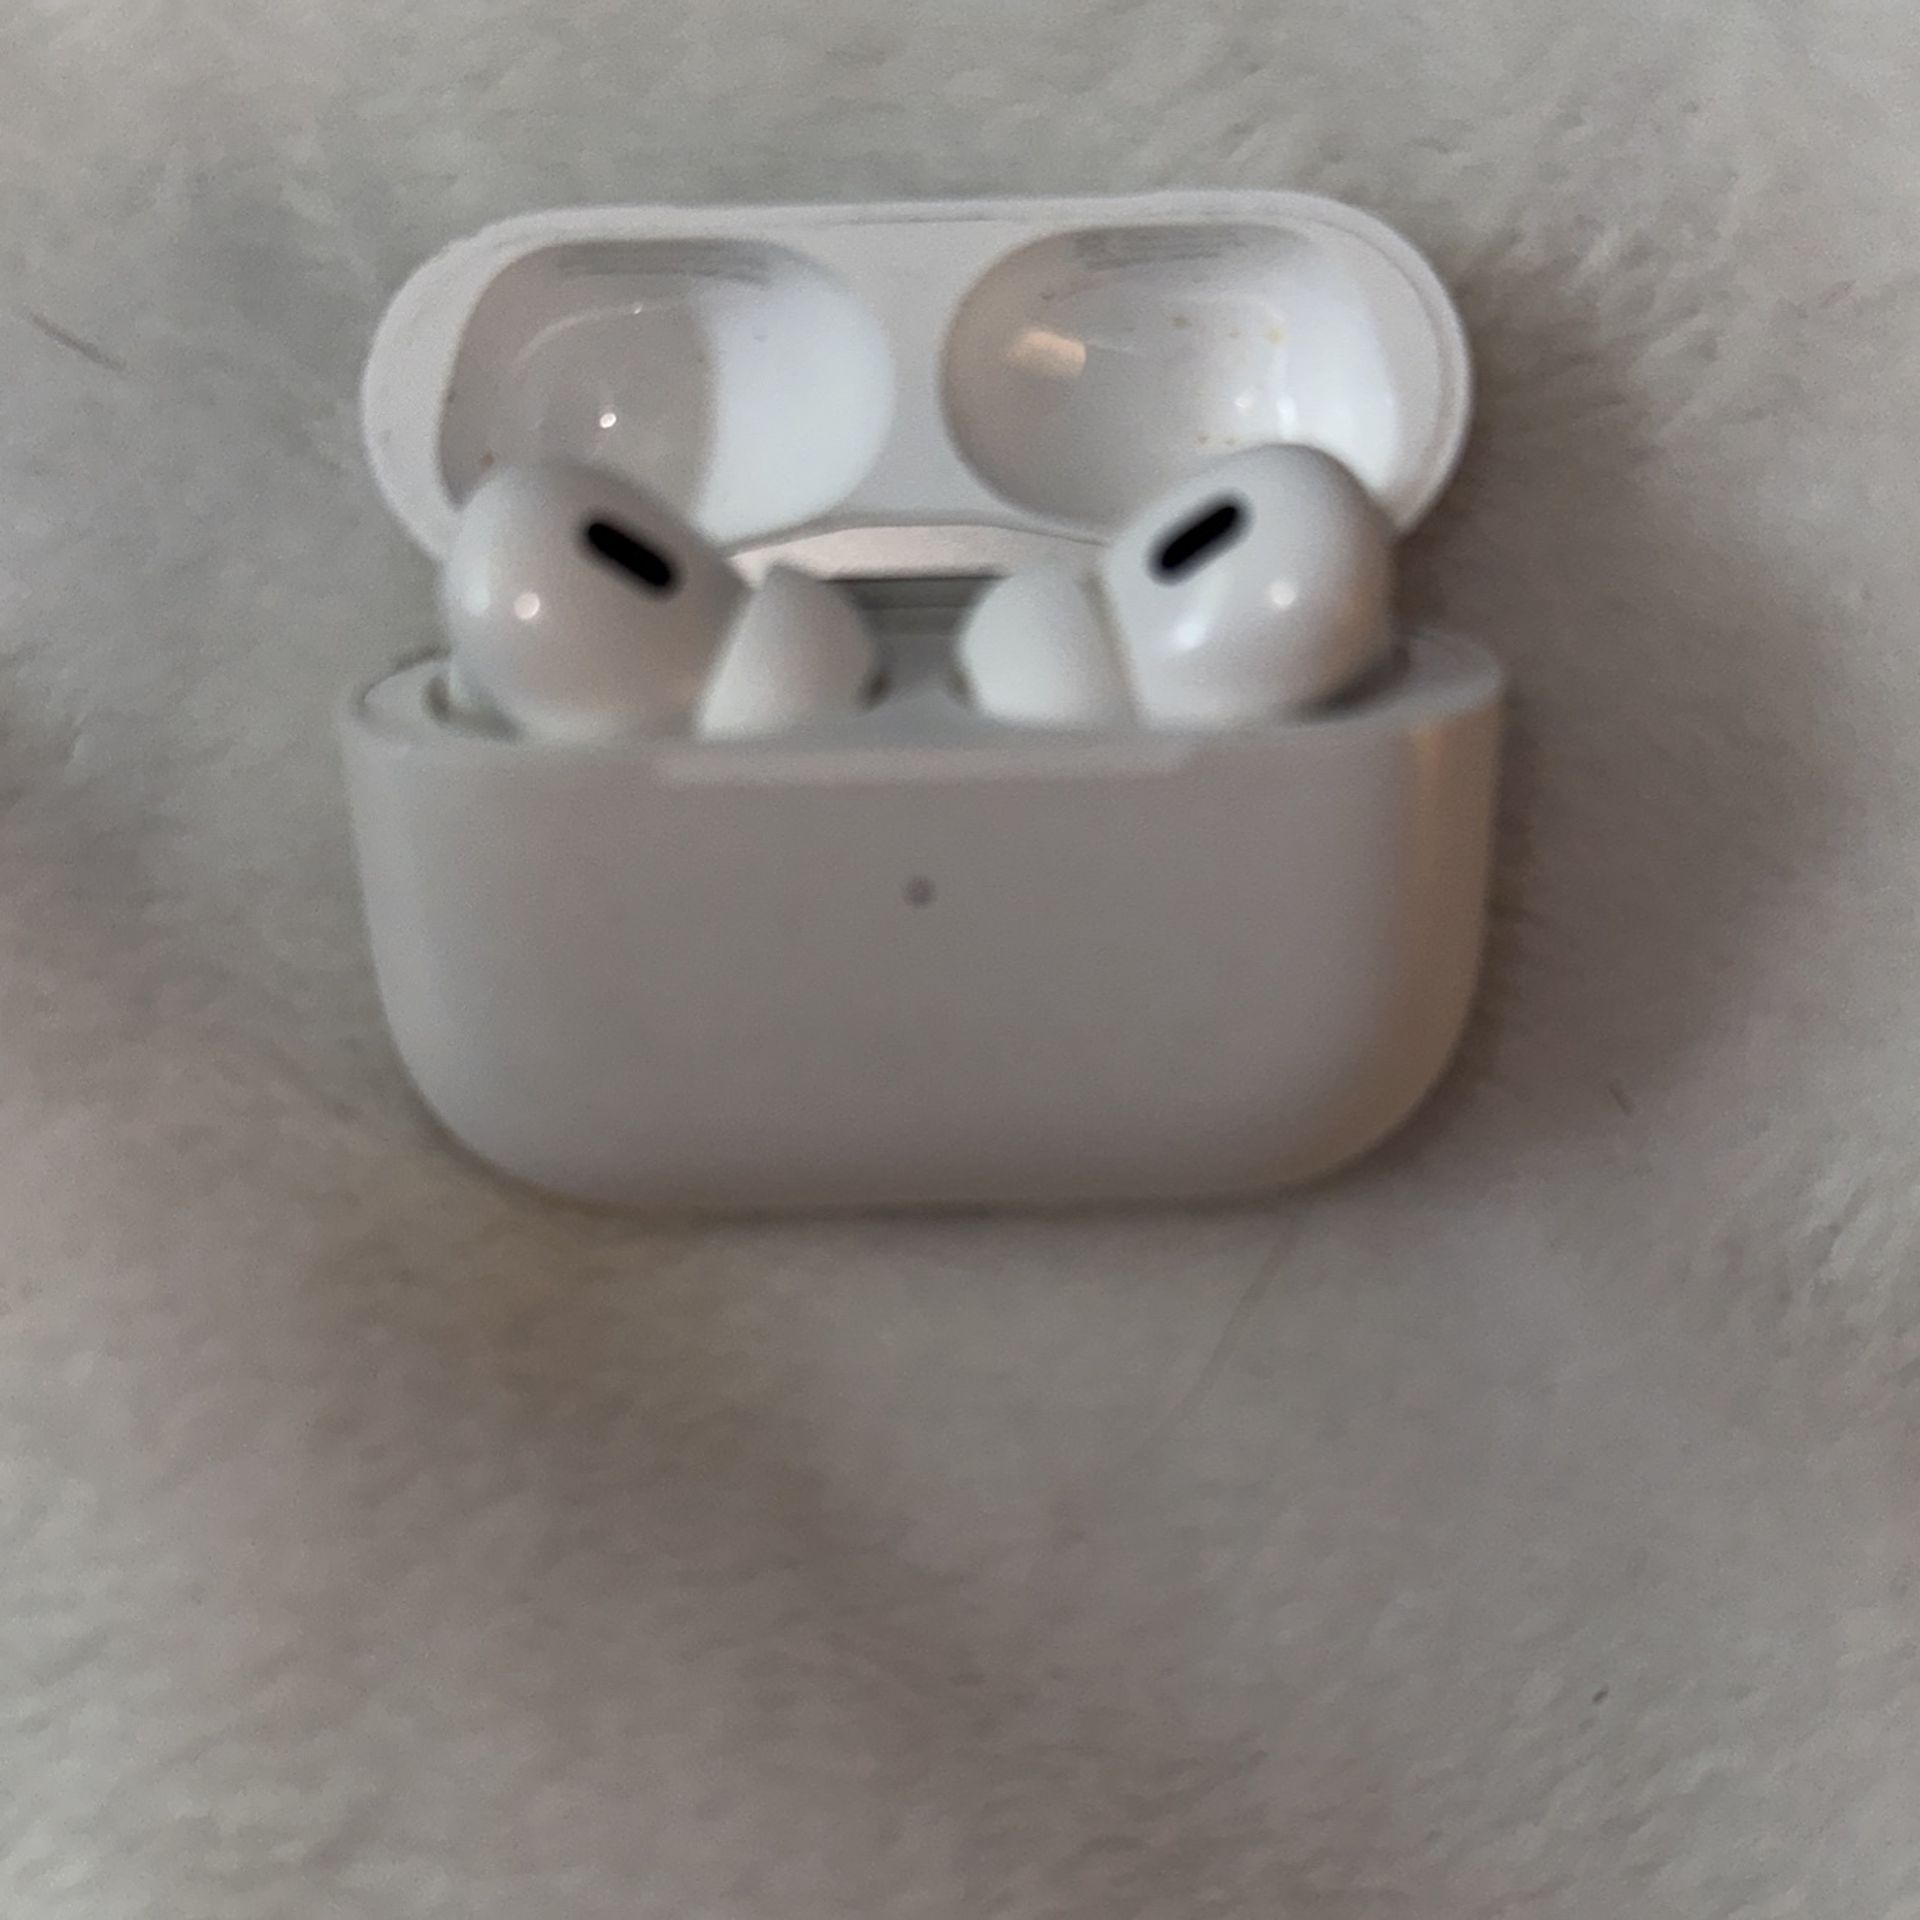 AIRPOD PROS TRADING FOR IPHONE 8 OR ABOVE